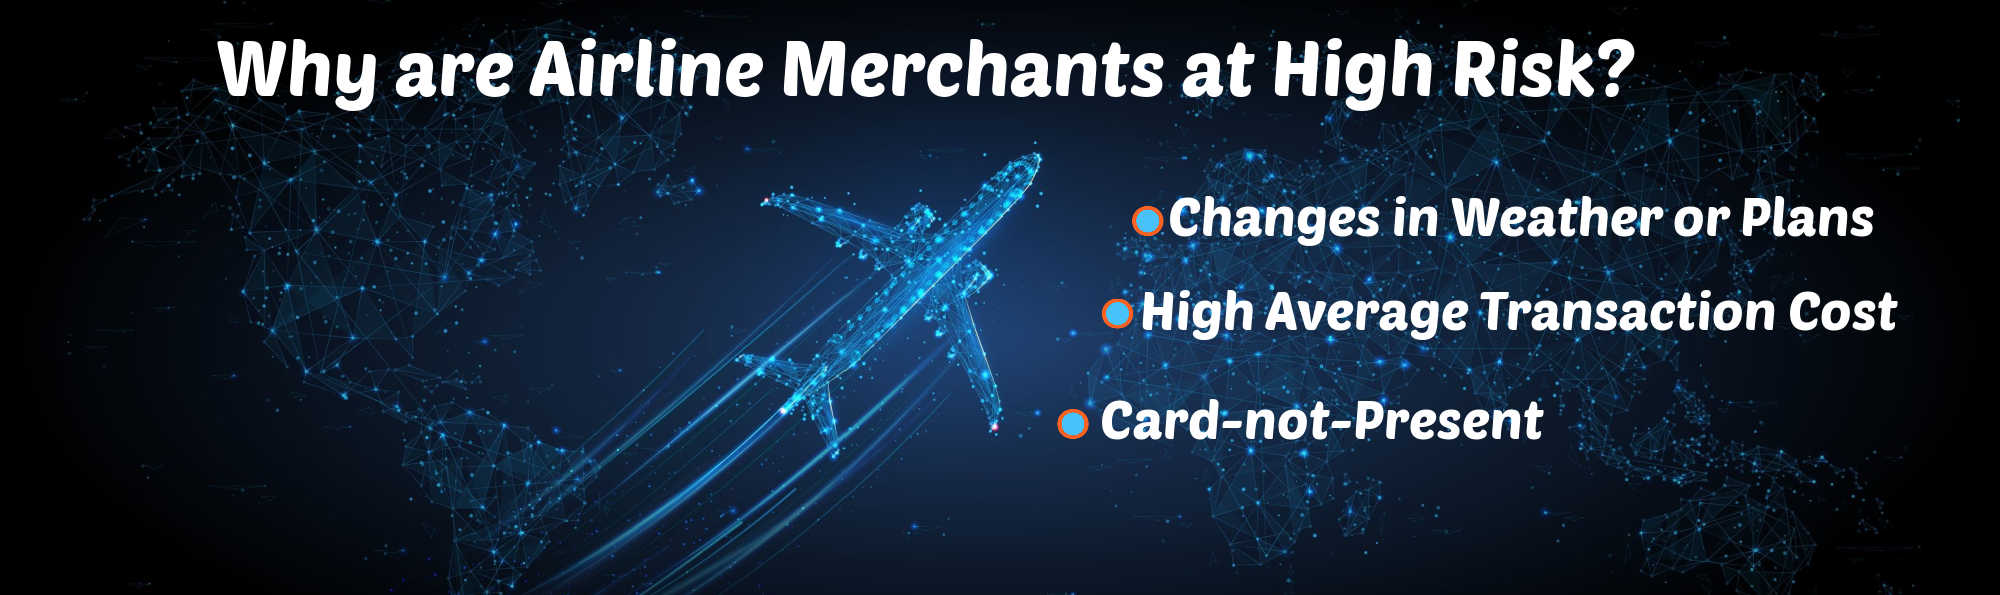 image of why are airline merchants at high risk